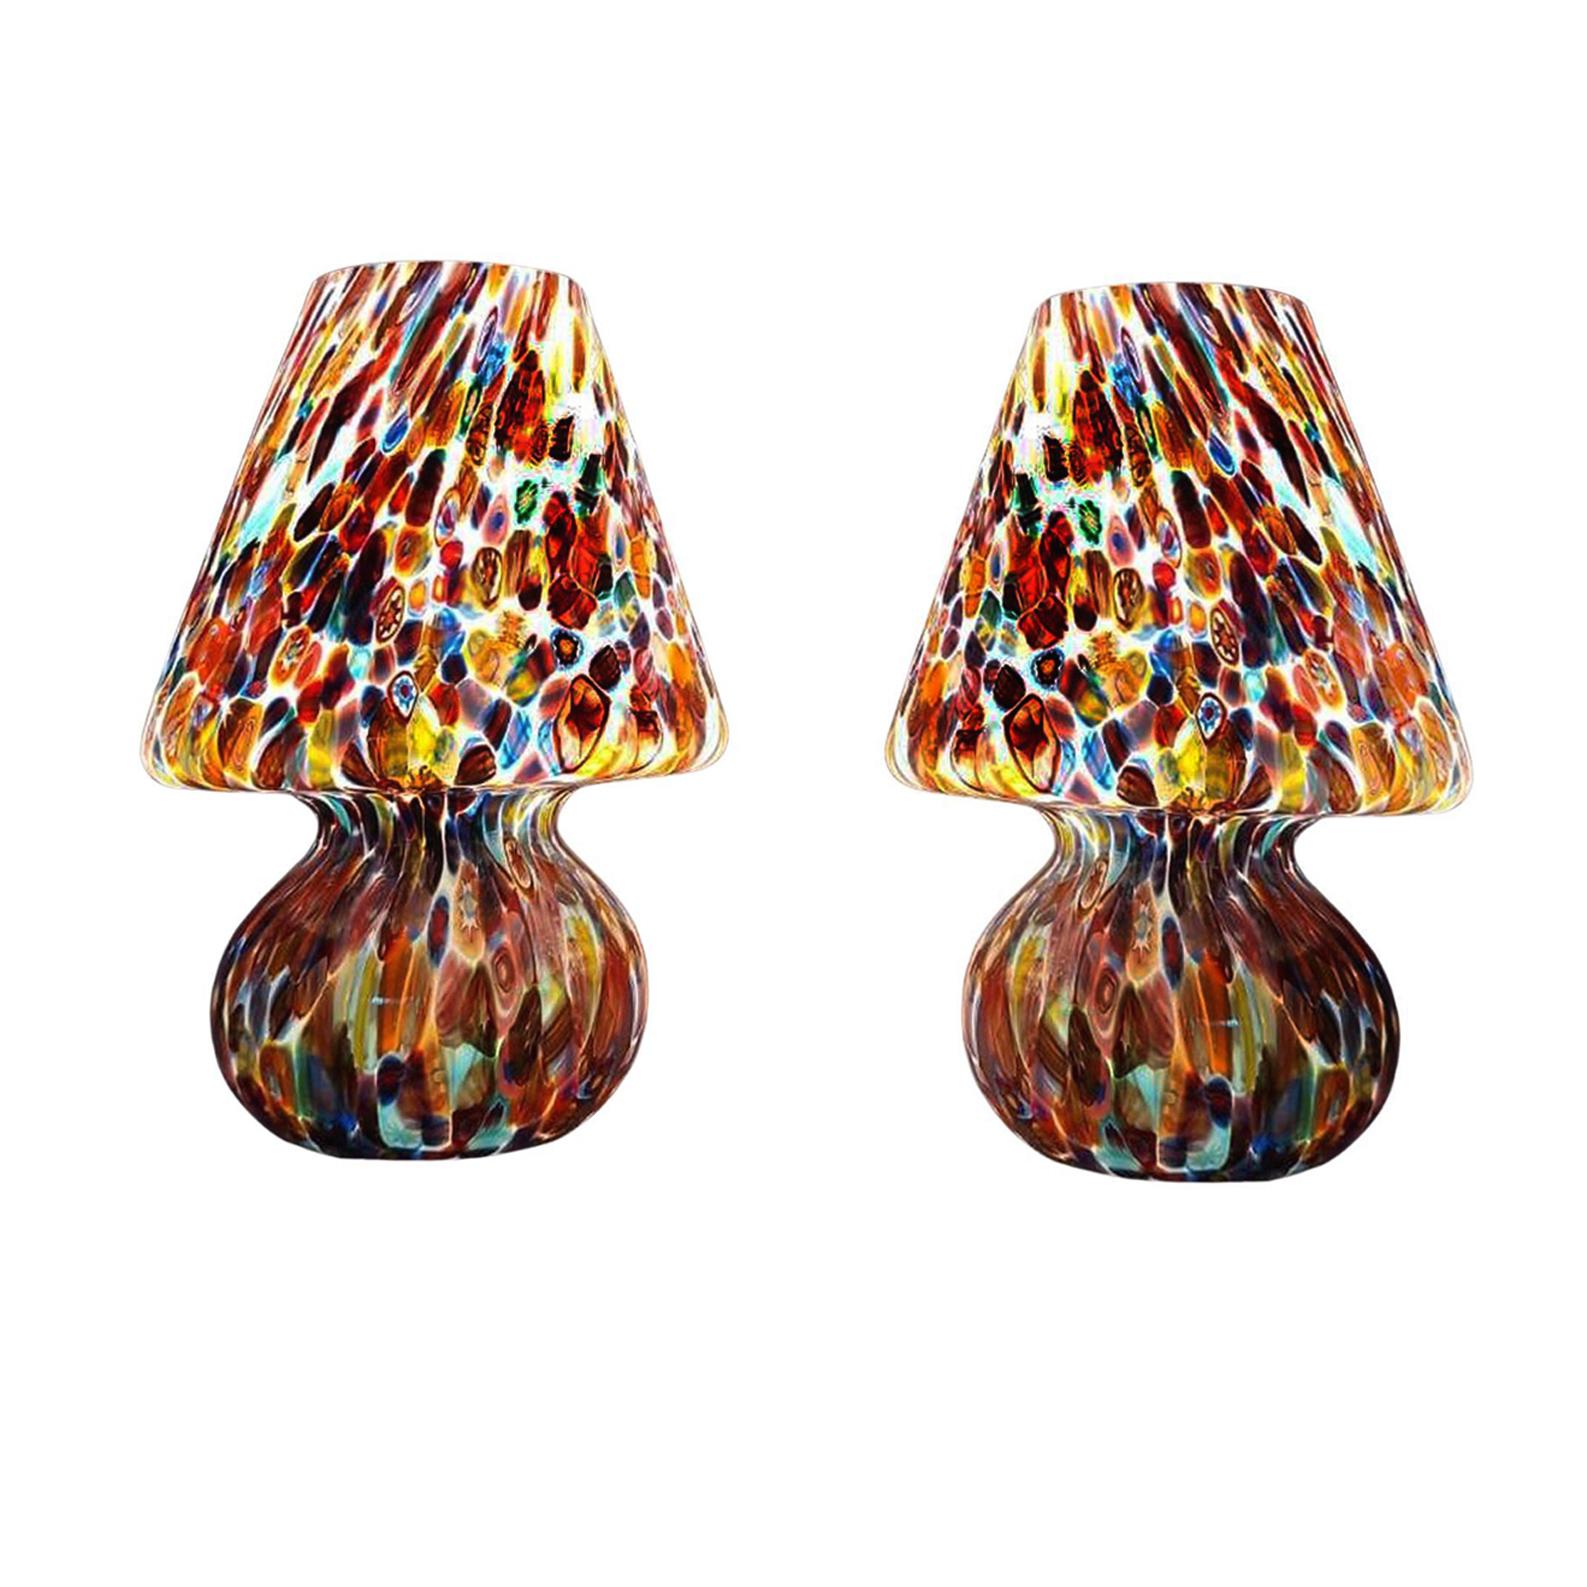 Mid-Century Modern Pair of Big Hancrafted Murano Table Lamps Murrine Millefiori Decor, Italy 2000's For Sale